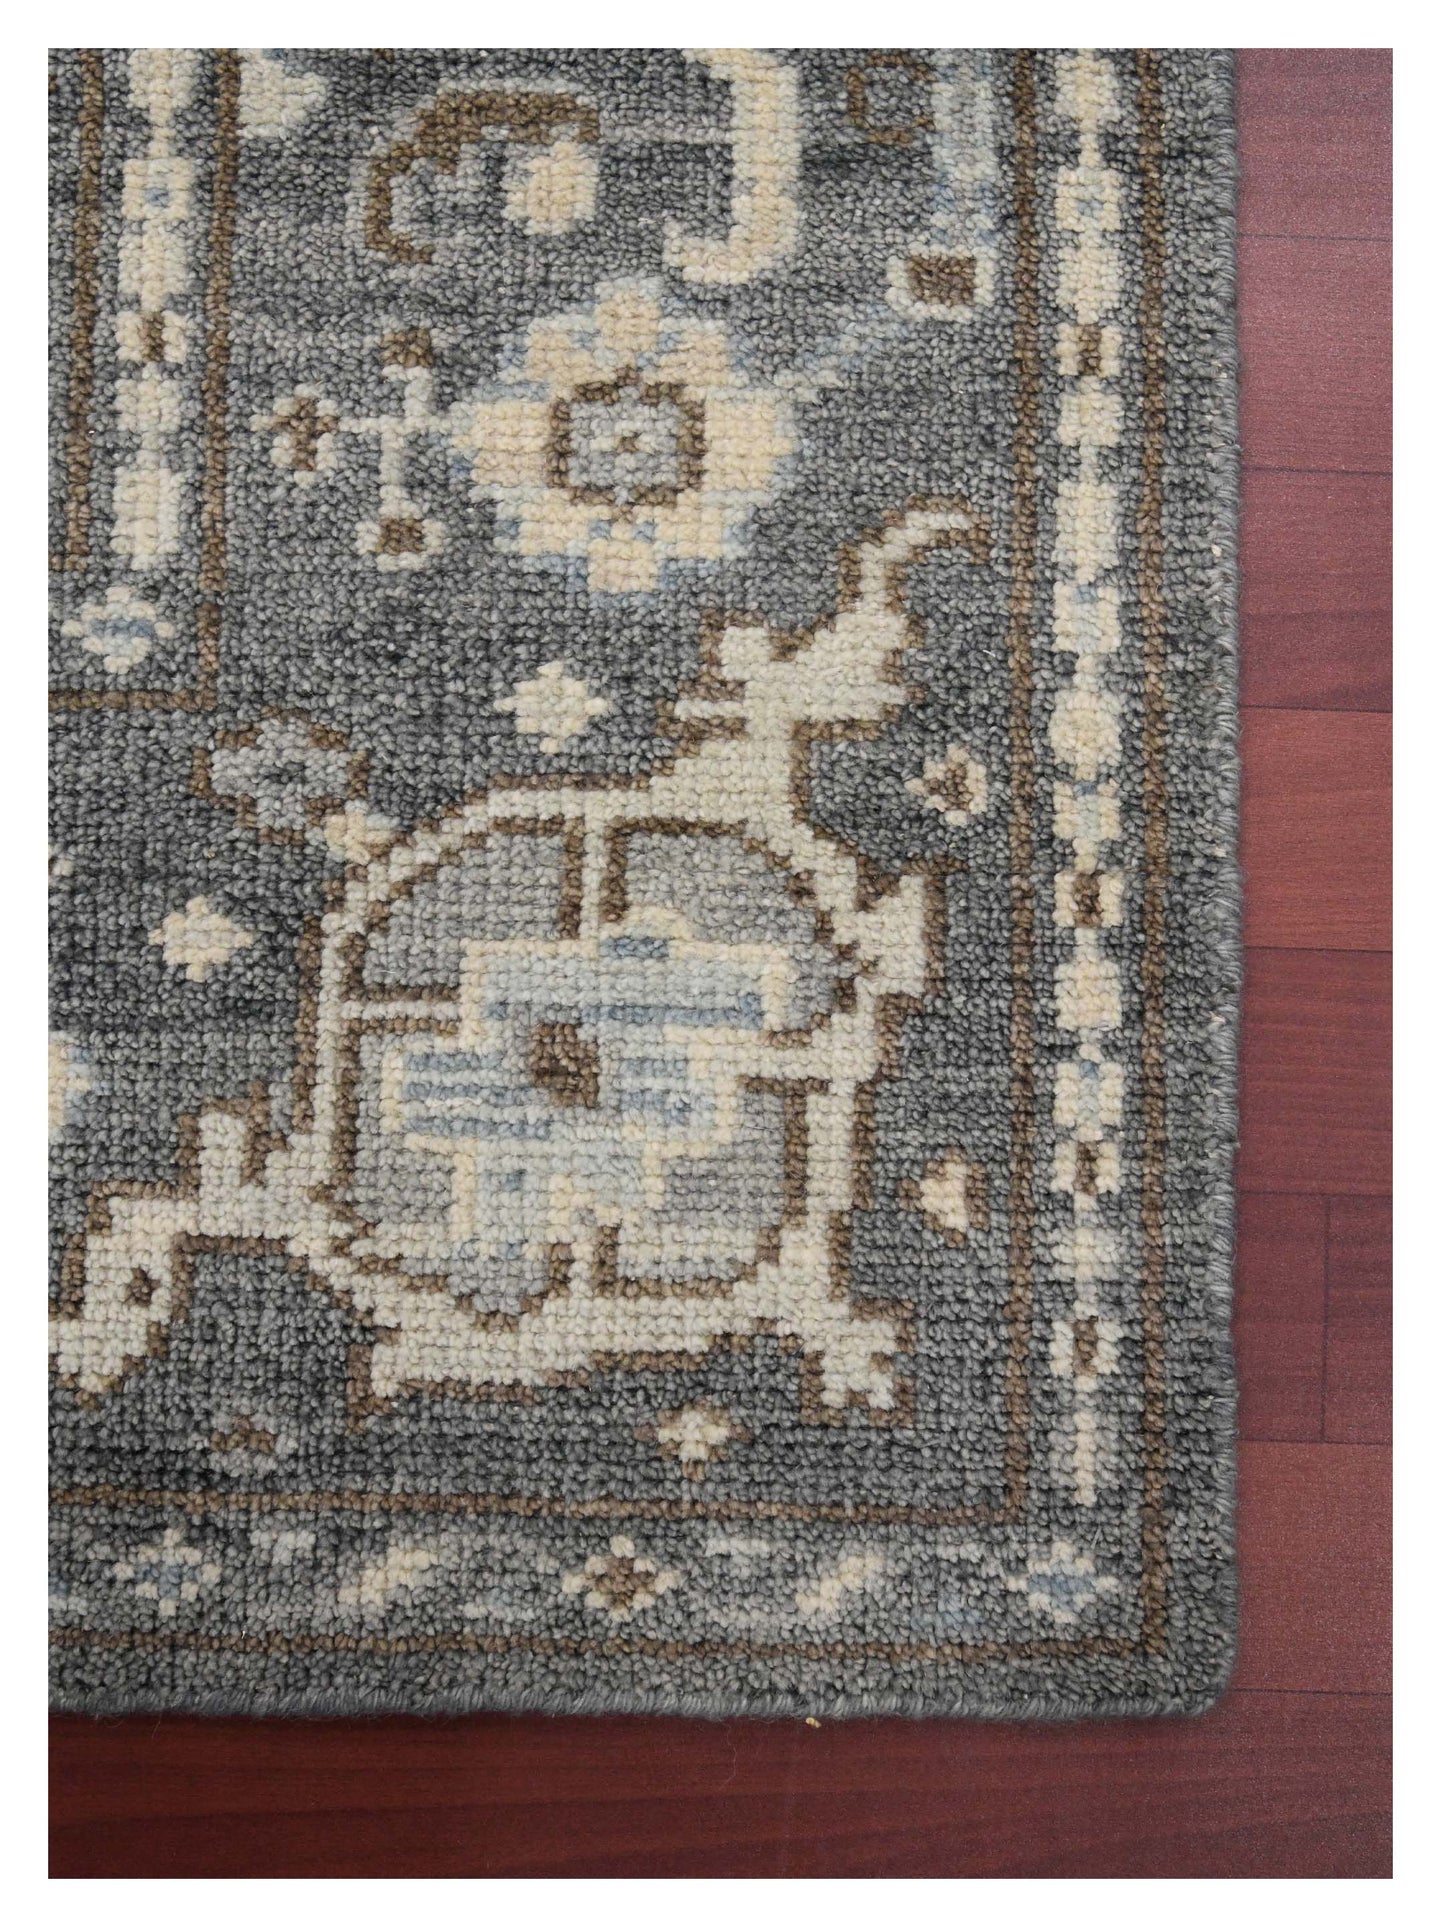 Limited DERBY DE-155 BROWN BEIGE Traditional Knotted Rug